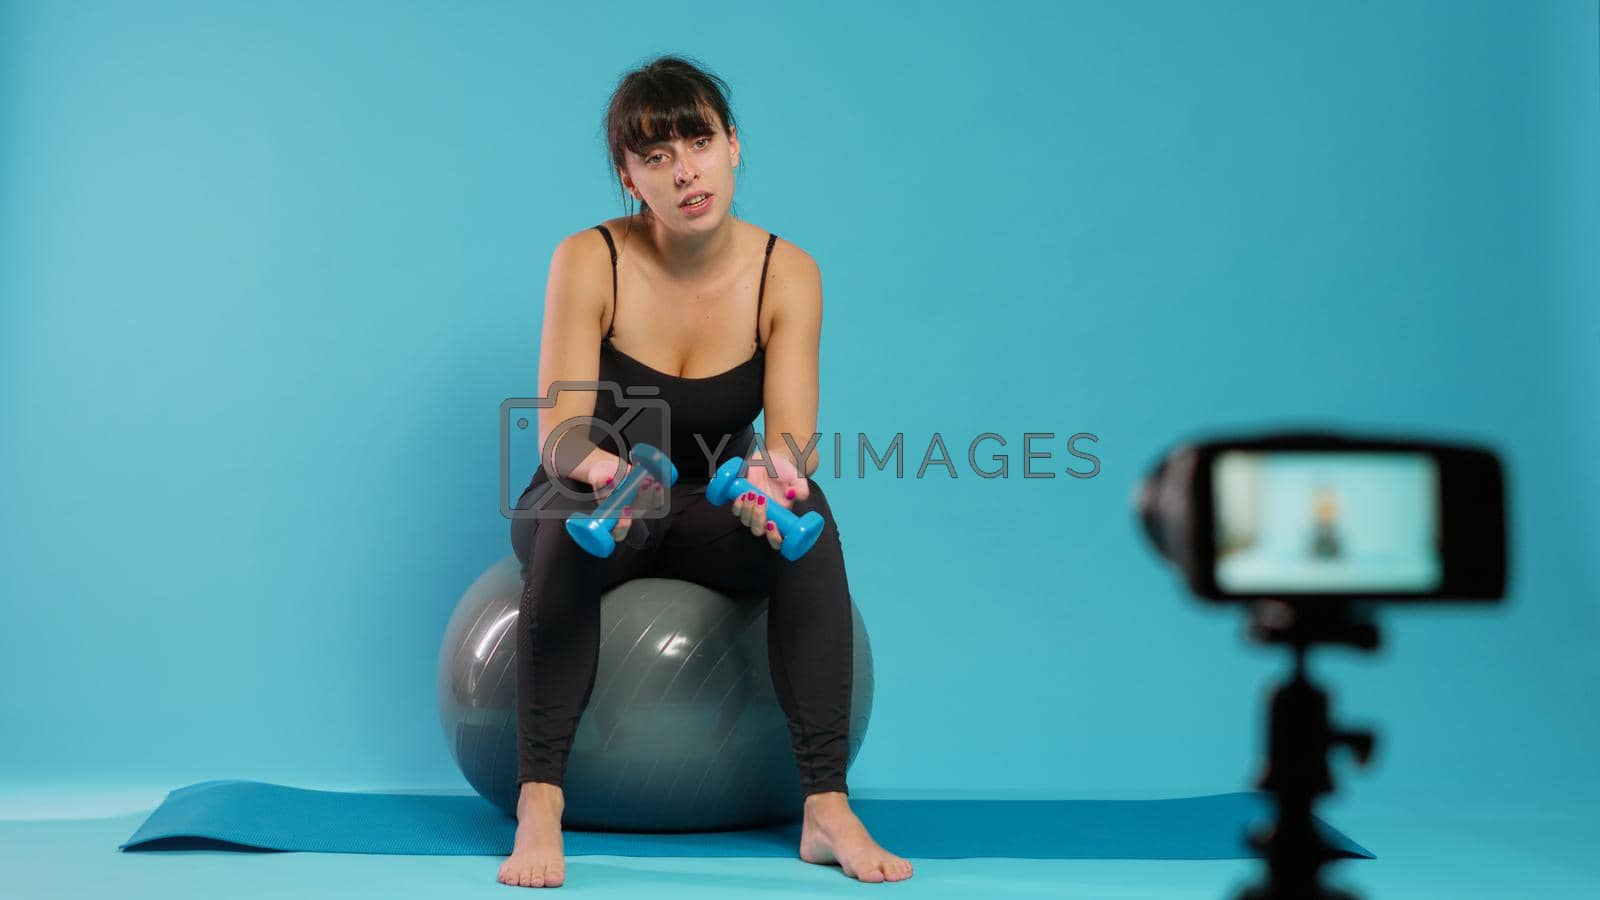 Fitness vlogger recording workout video on camera in studio, using dumbbells to explain lifting technique for sport practice. Muscular woman filming online training lesson on toning ball.